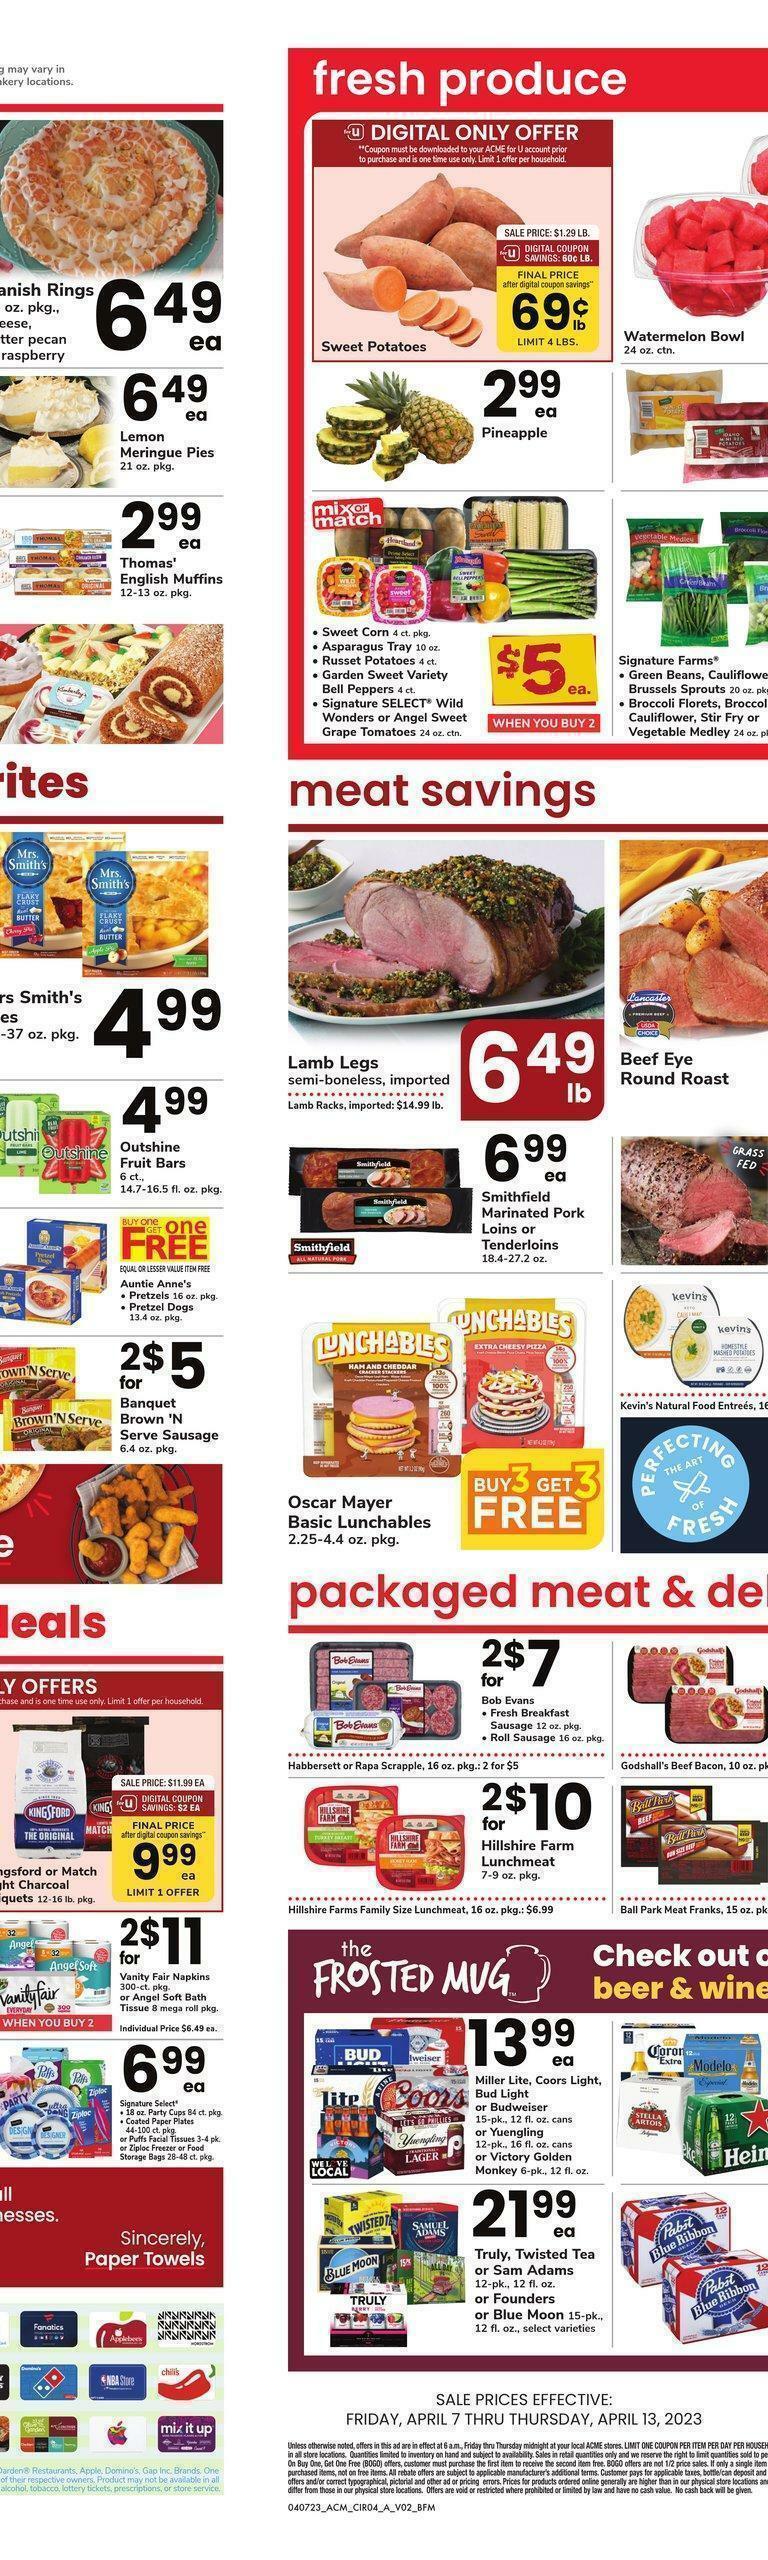 ACME Markets Weekly Ad from April 7